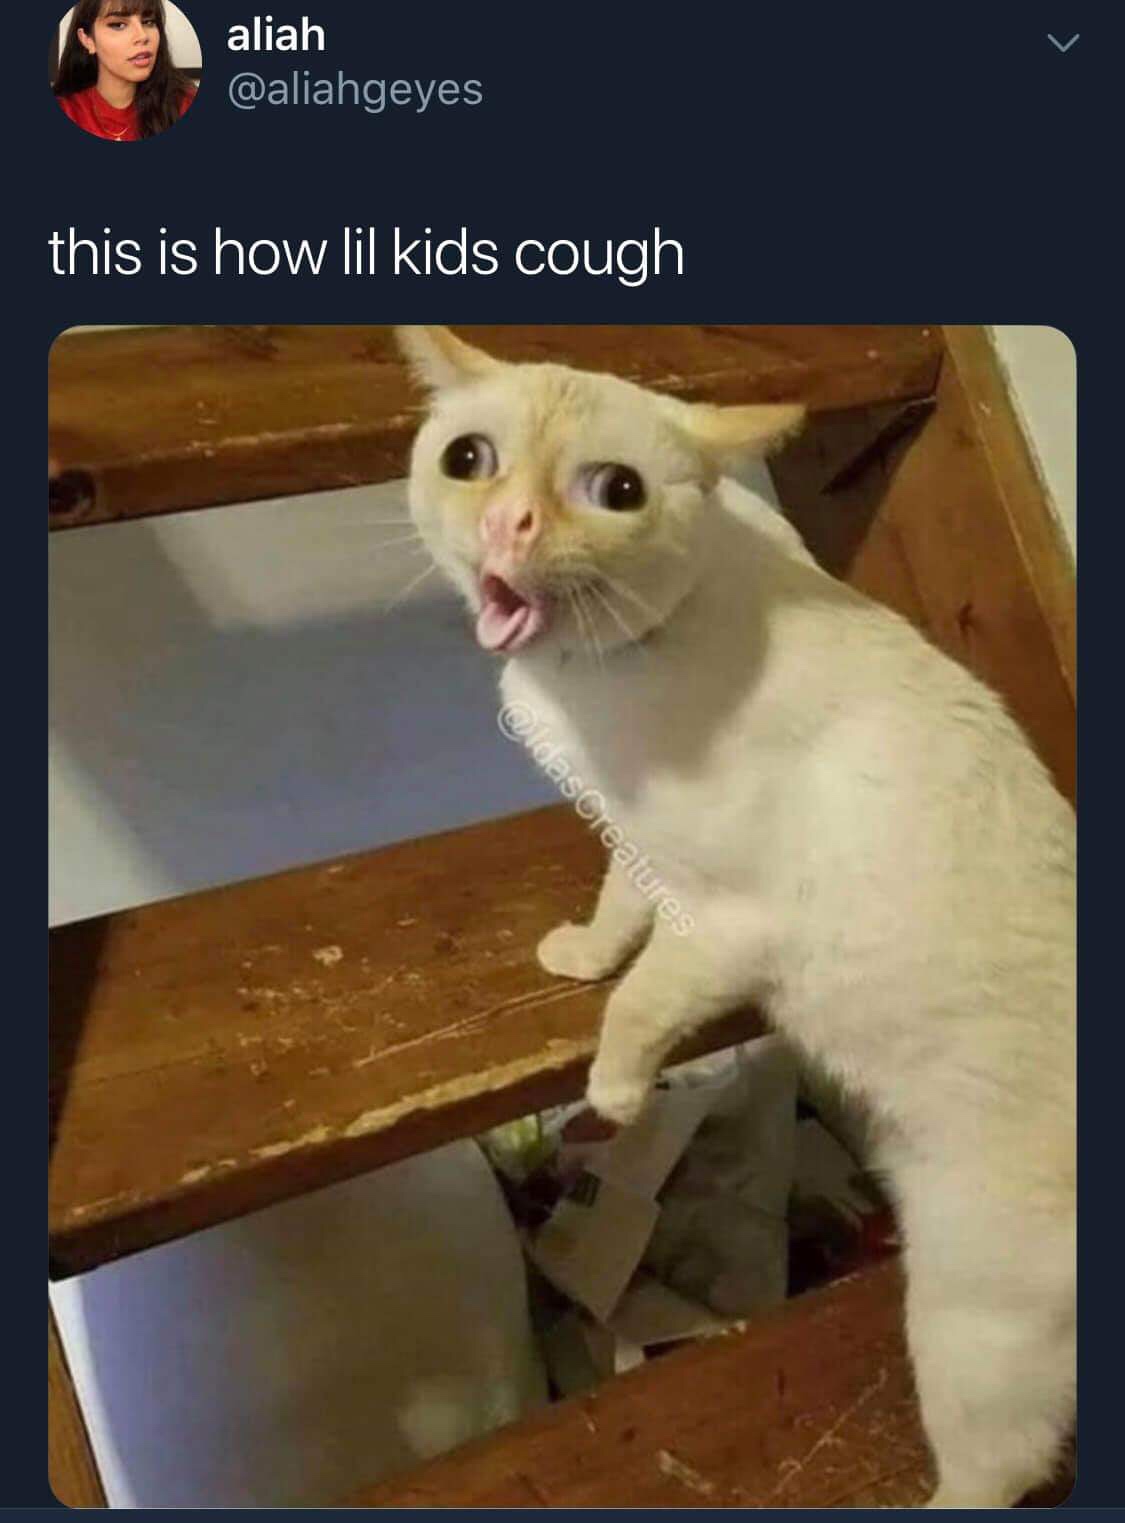 lil kids cough - aliah this is how lil kids cough OldasCreatures